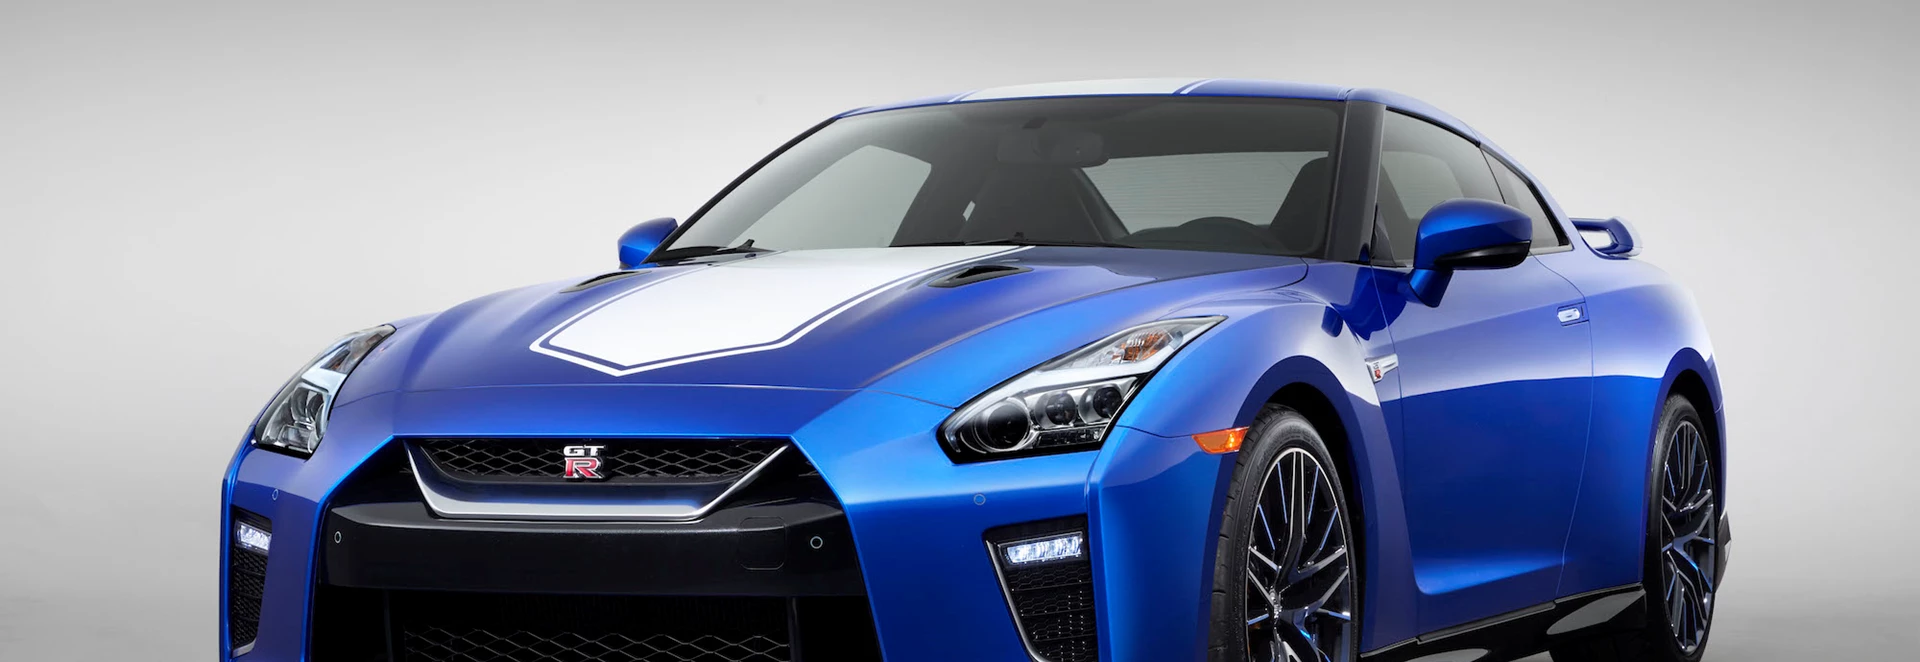 Pricing and specs announced for Nissan GT-R 50th Anniversary Edition